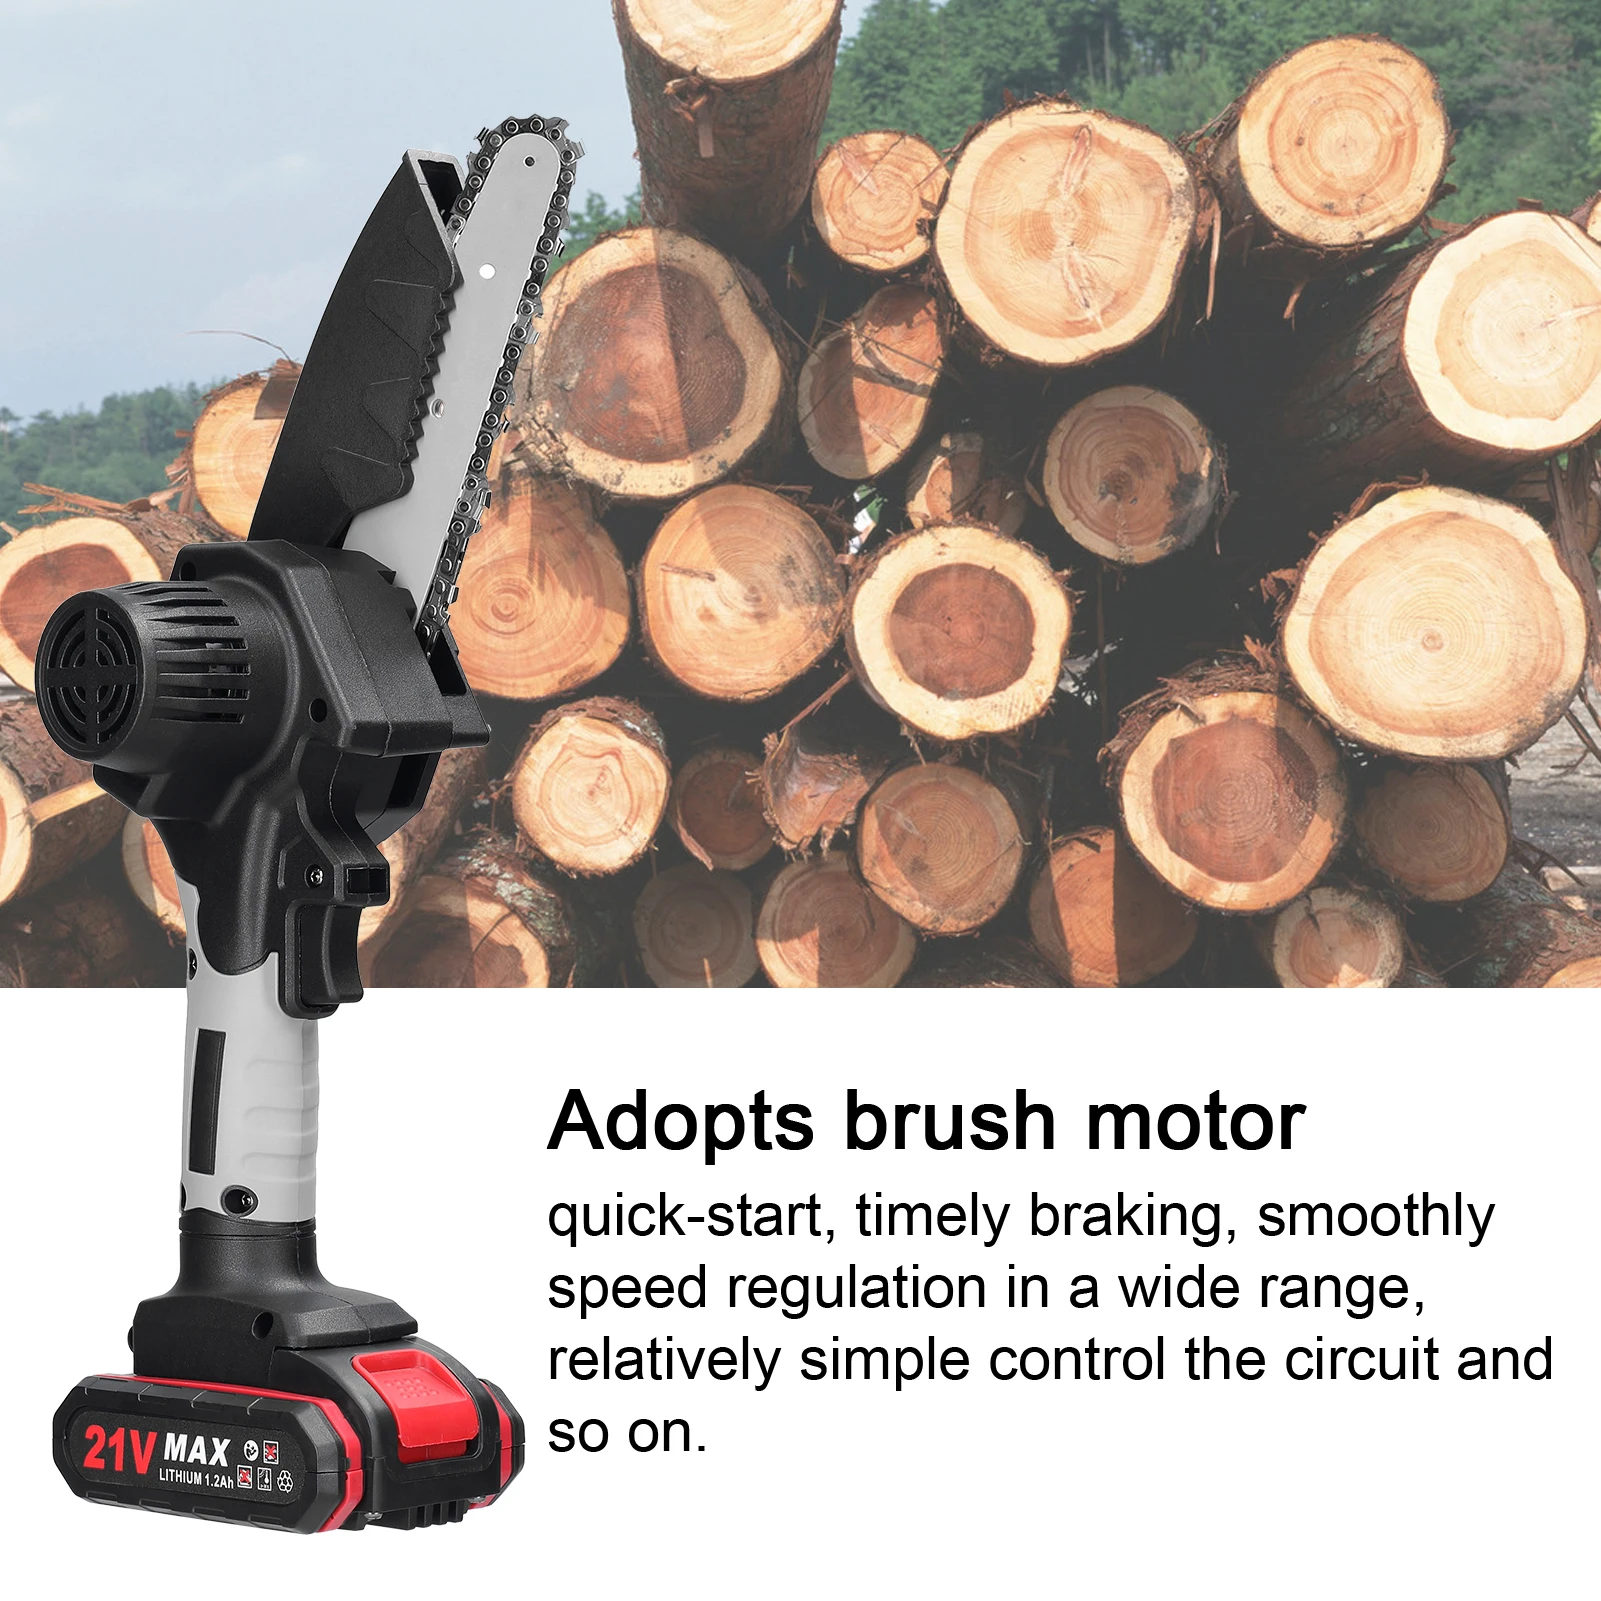 https://ae01.alicdn.com/kf/Se88dbd1f6bf94bc0a94f918a43db6a70N/21V-6-inch-Portable-Electric-Pruning-Saw-Small-Wood-Splitting-Chainsaw-Brush-Motor-Woodworking-Tool-for.jpg